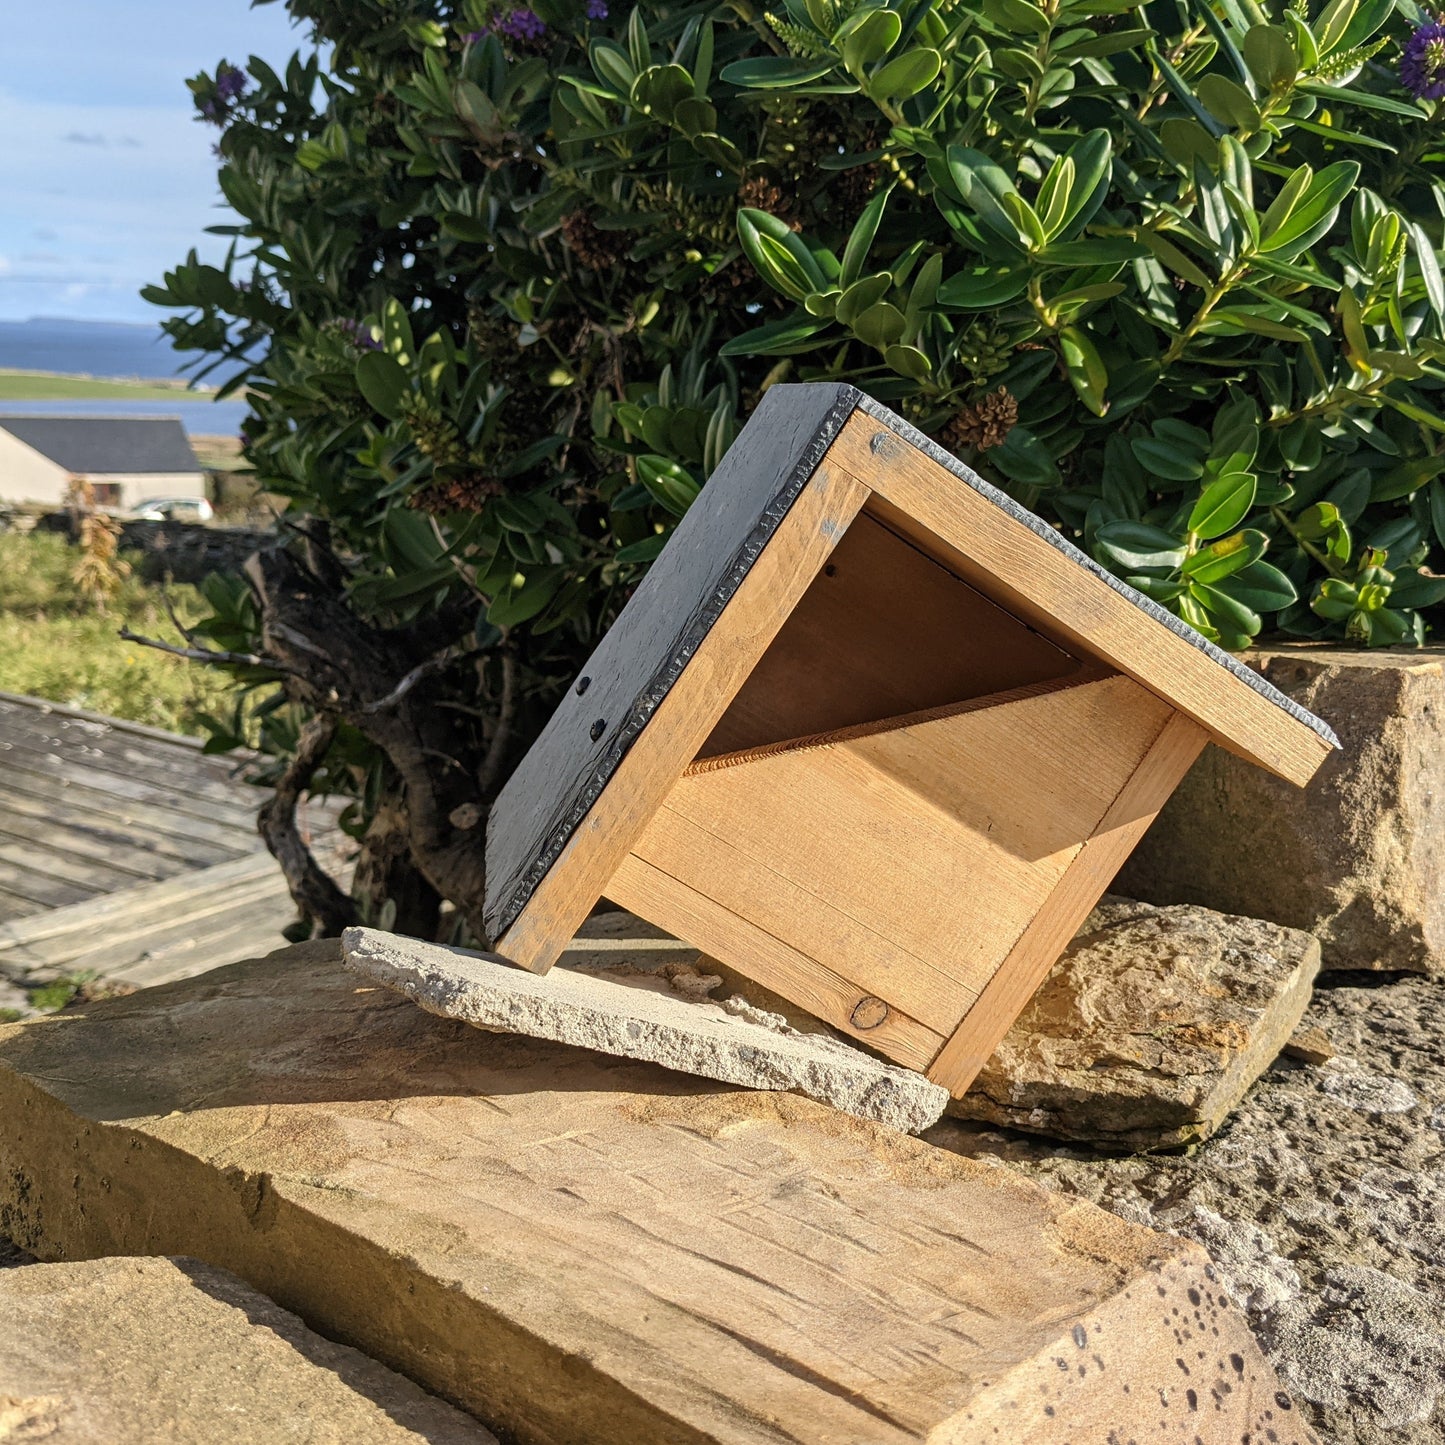 Front of Robin Nest box showing the entrance for the birds